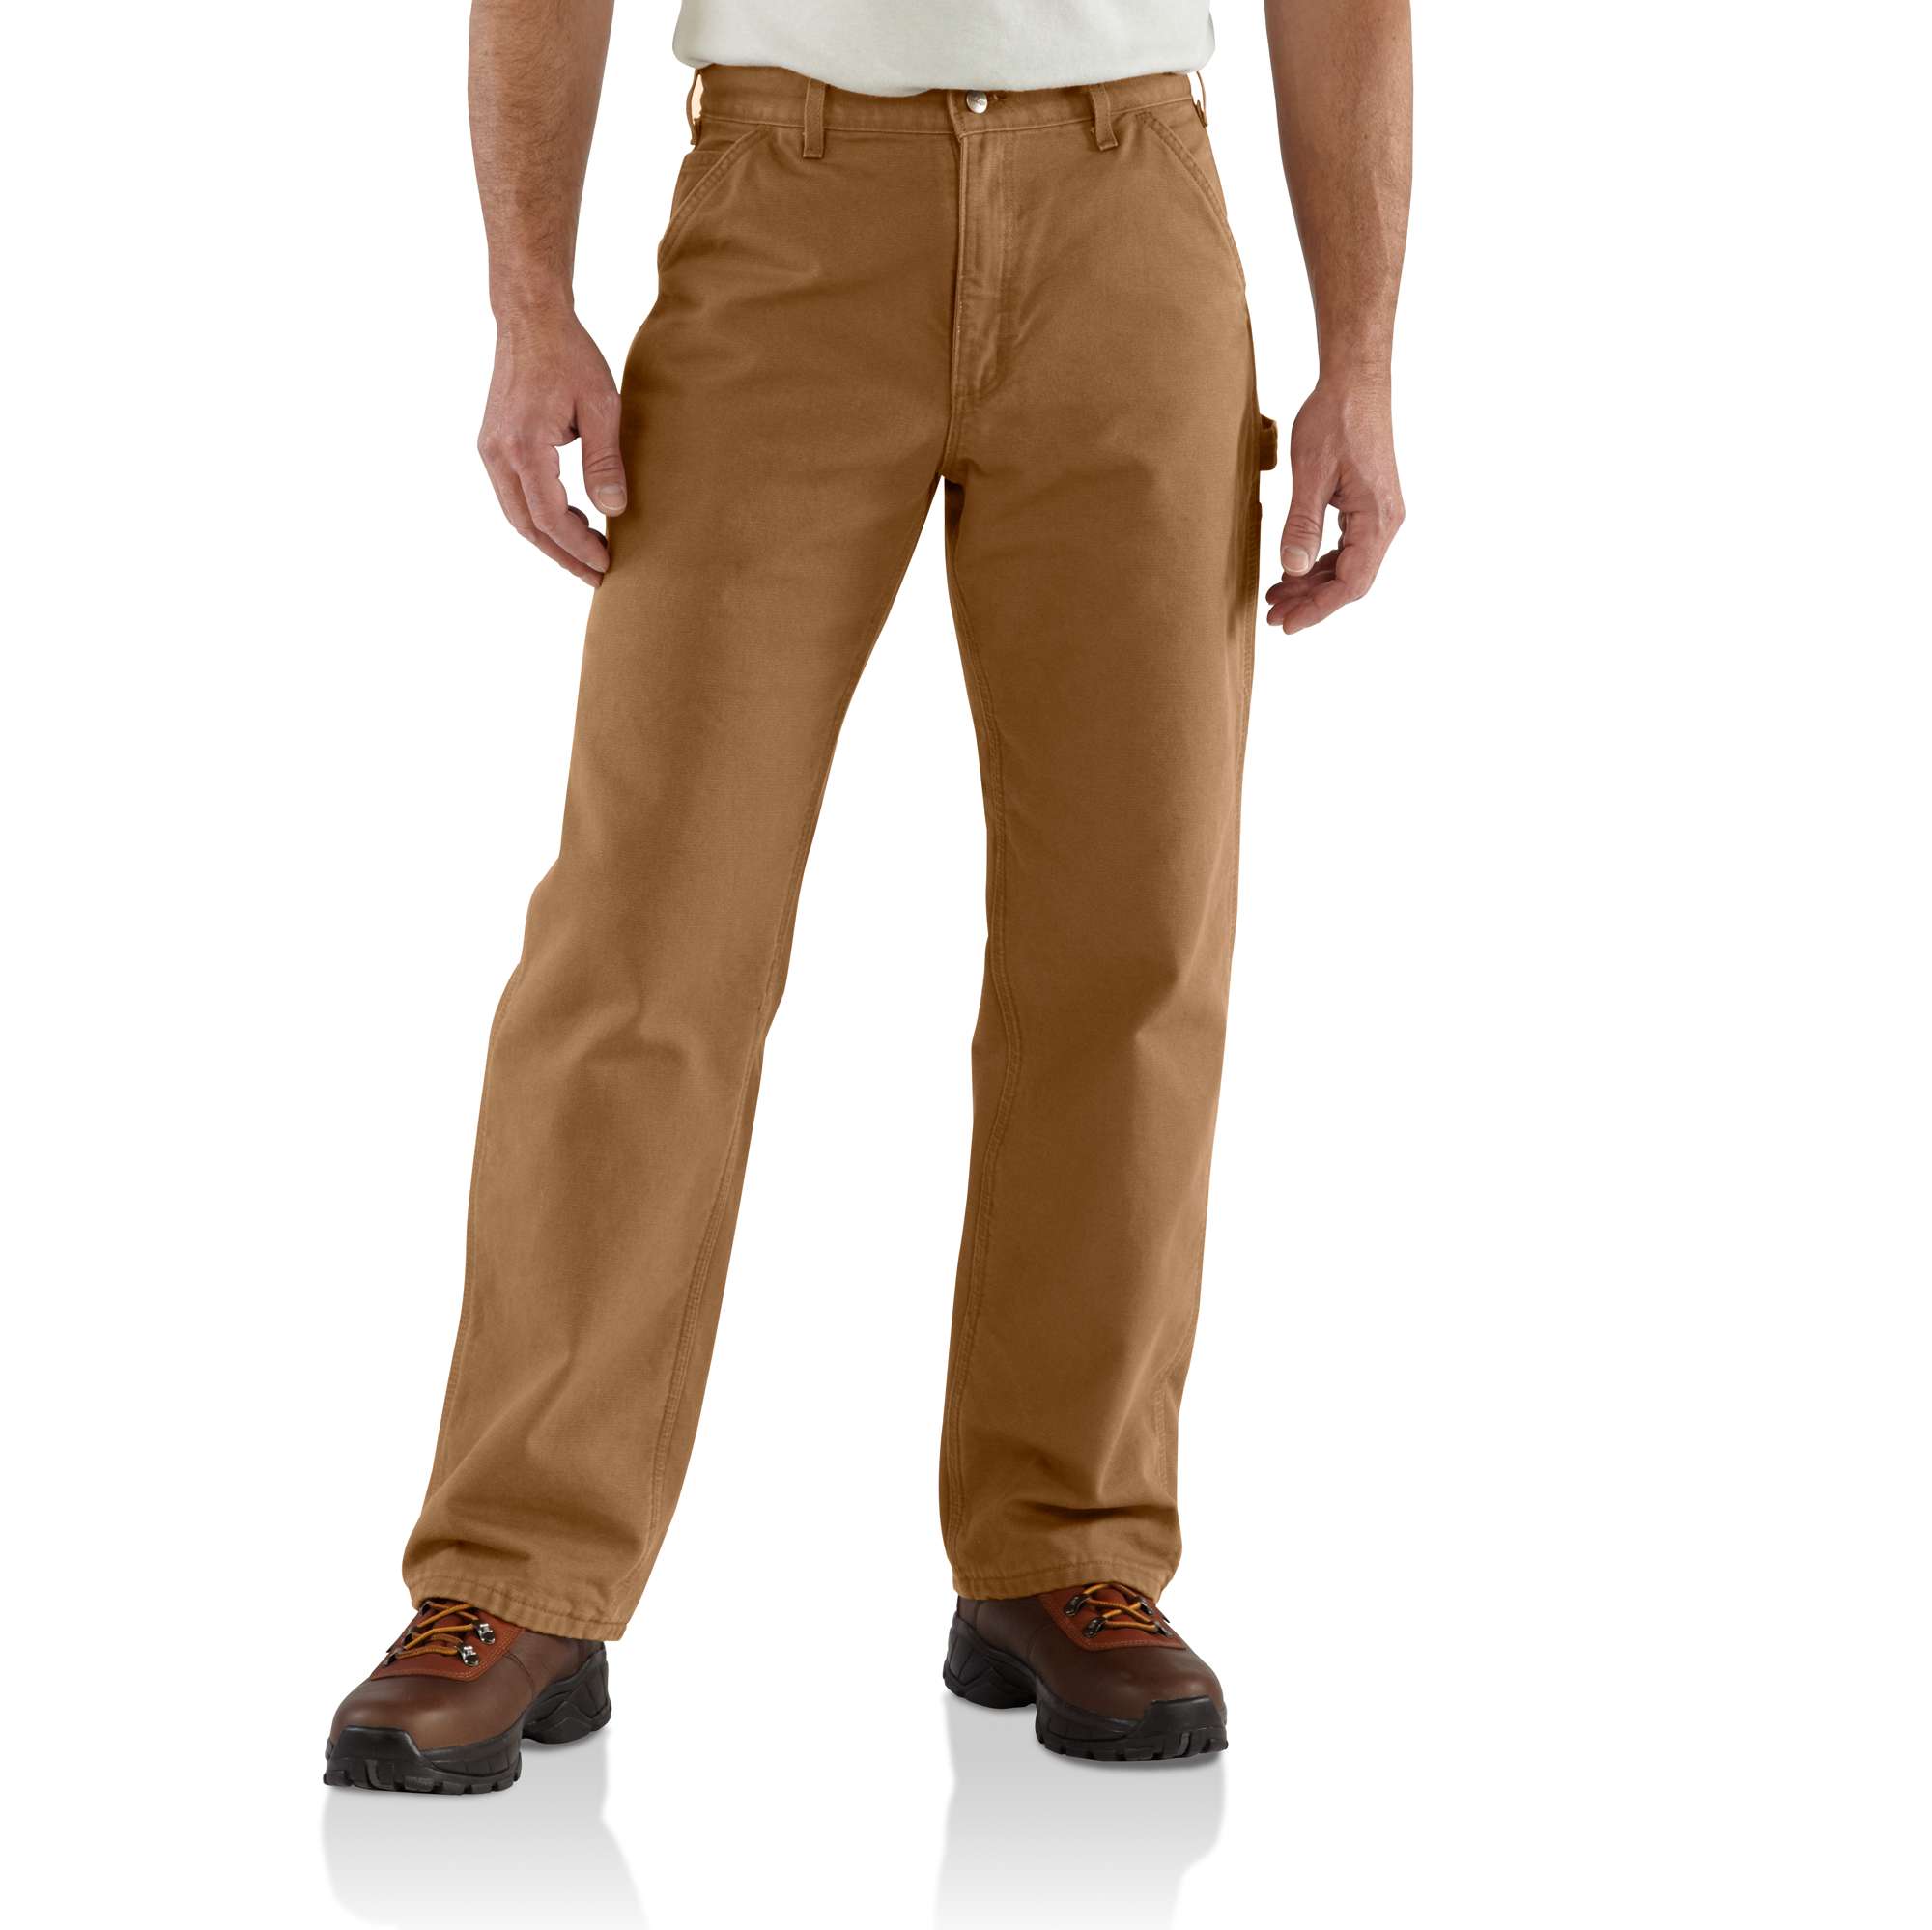 carhartt flannel lined pants mens